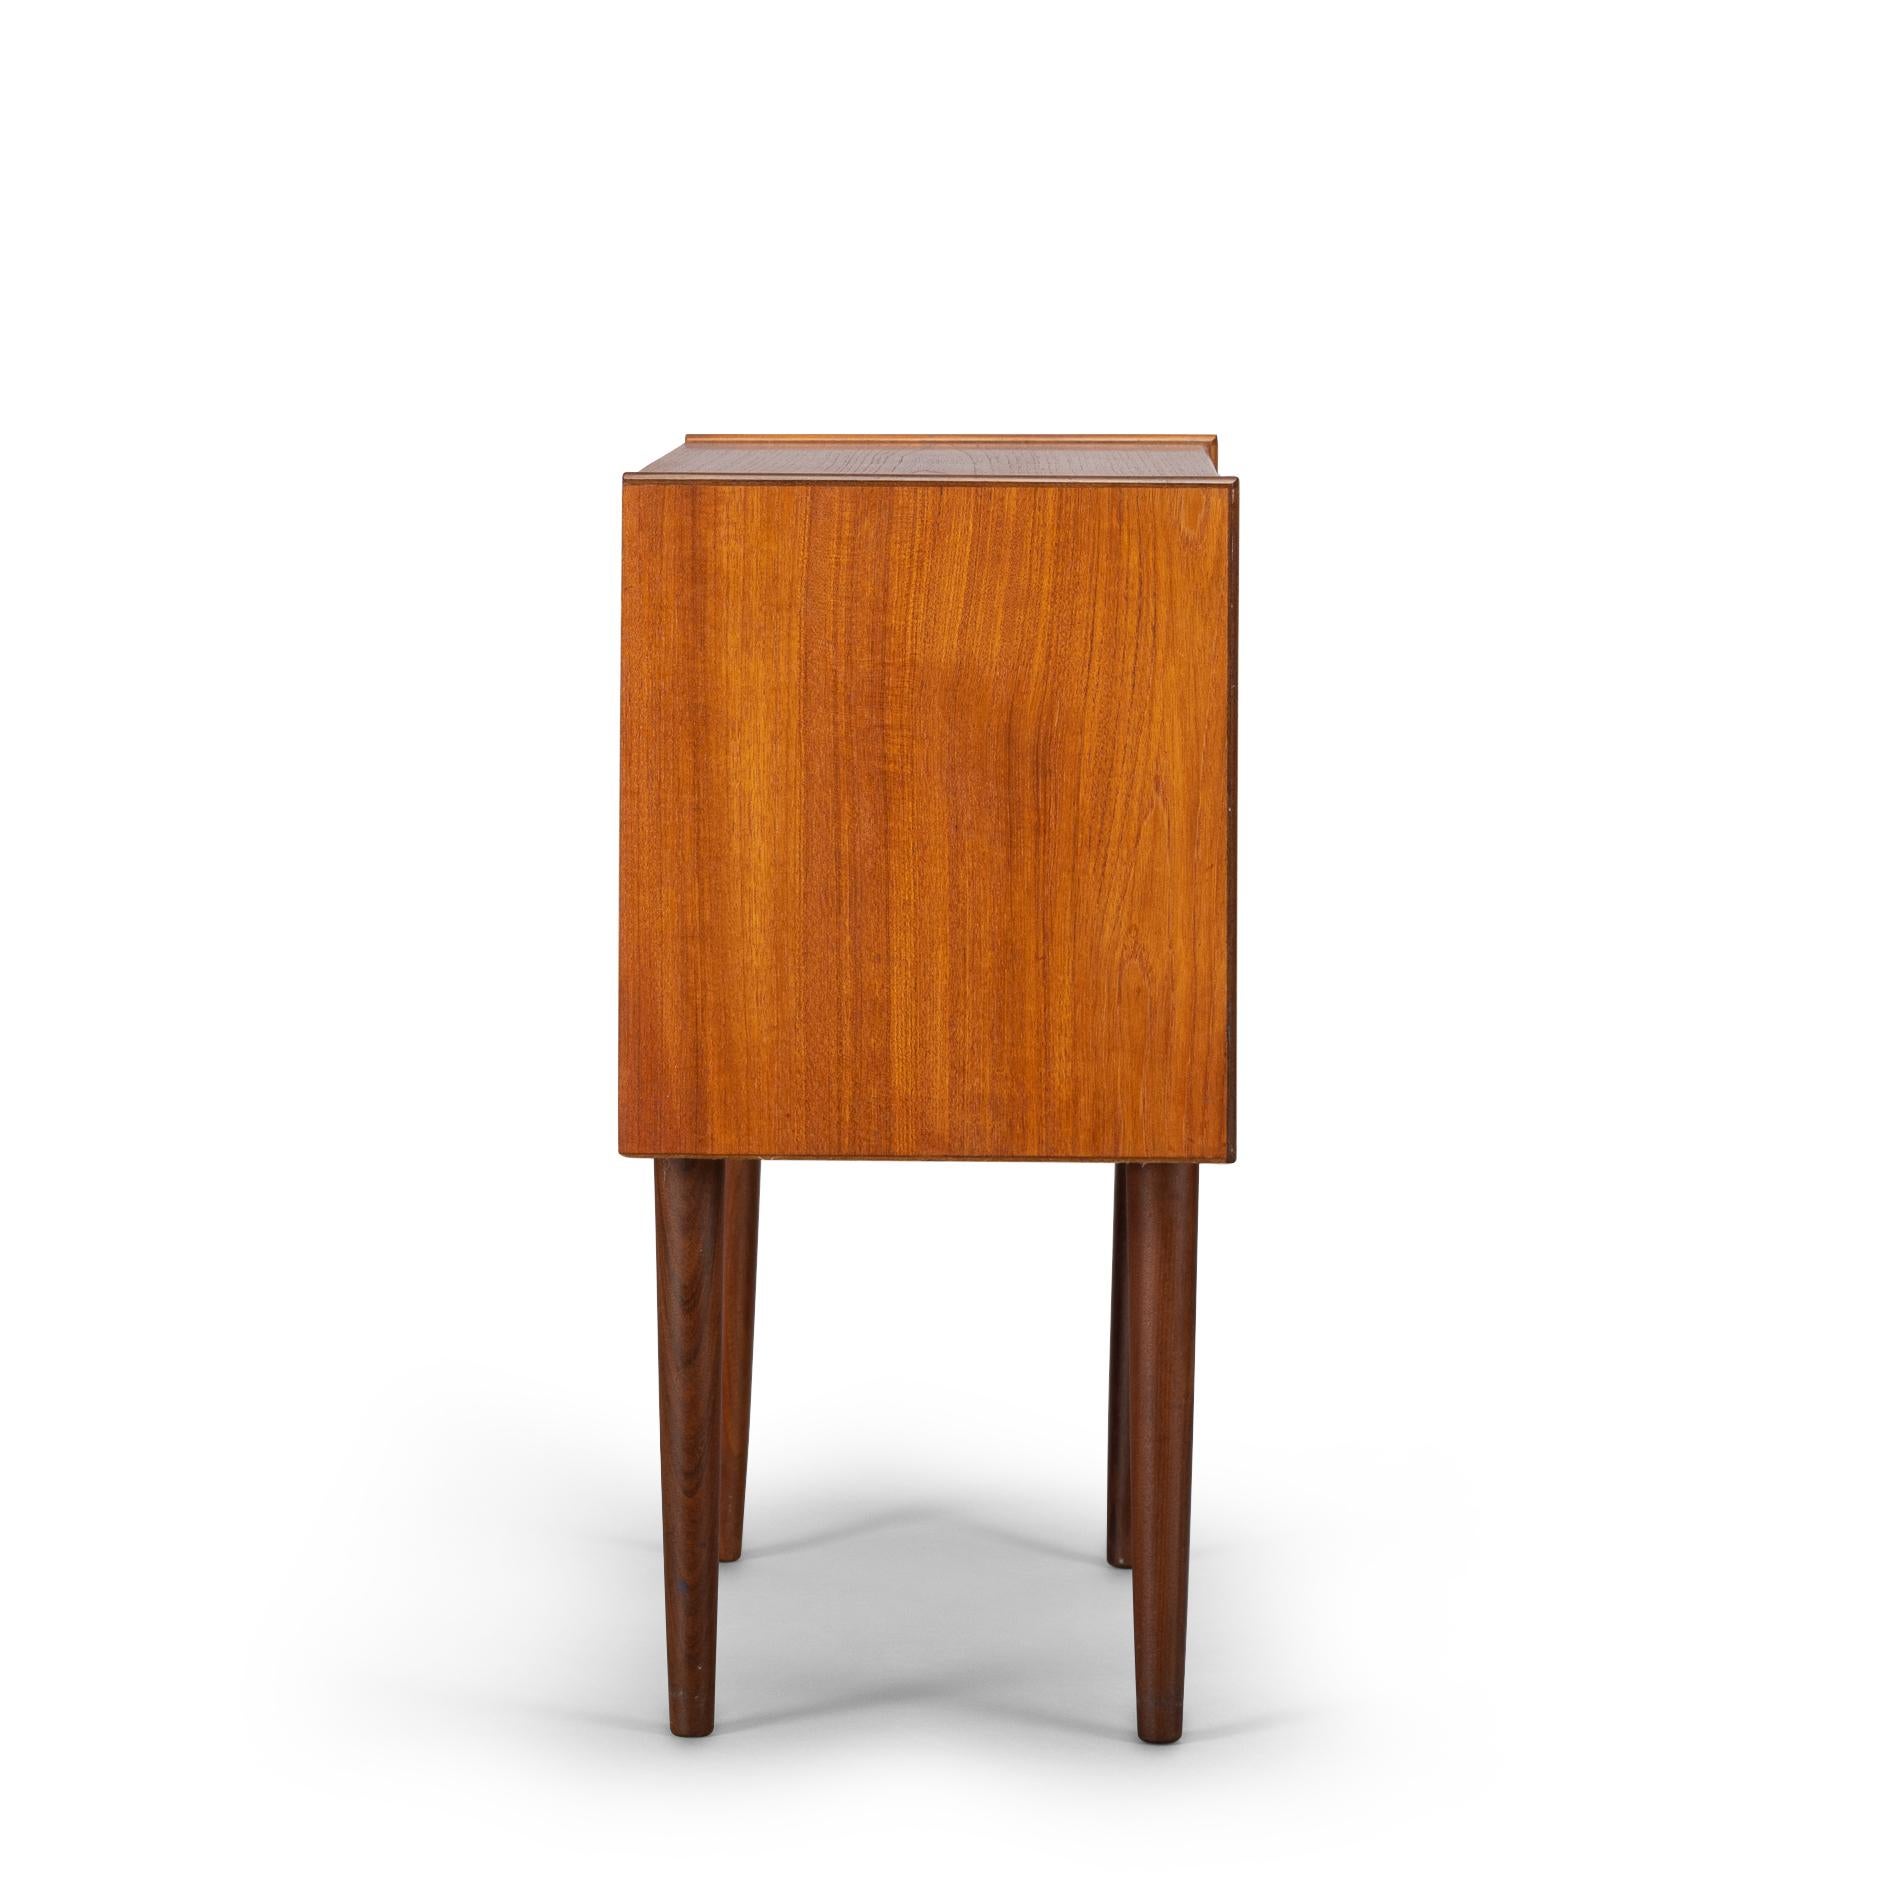 This petite Danish nightstand is made out of teak veneer in the late 1960s and embraces the period in full swing. Three drawers with fantastic rounded grips complete the sign of the times. The sides on top of this small chest are slightly raised.